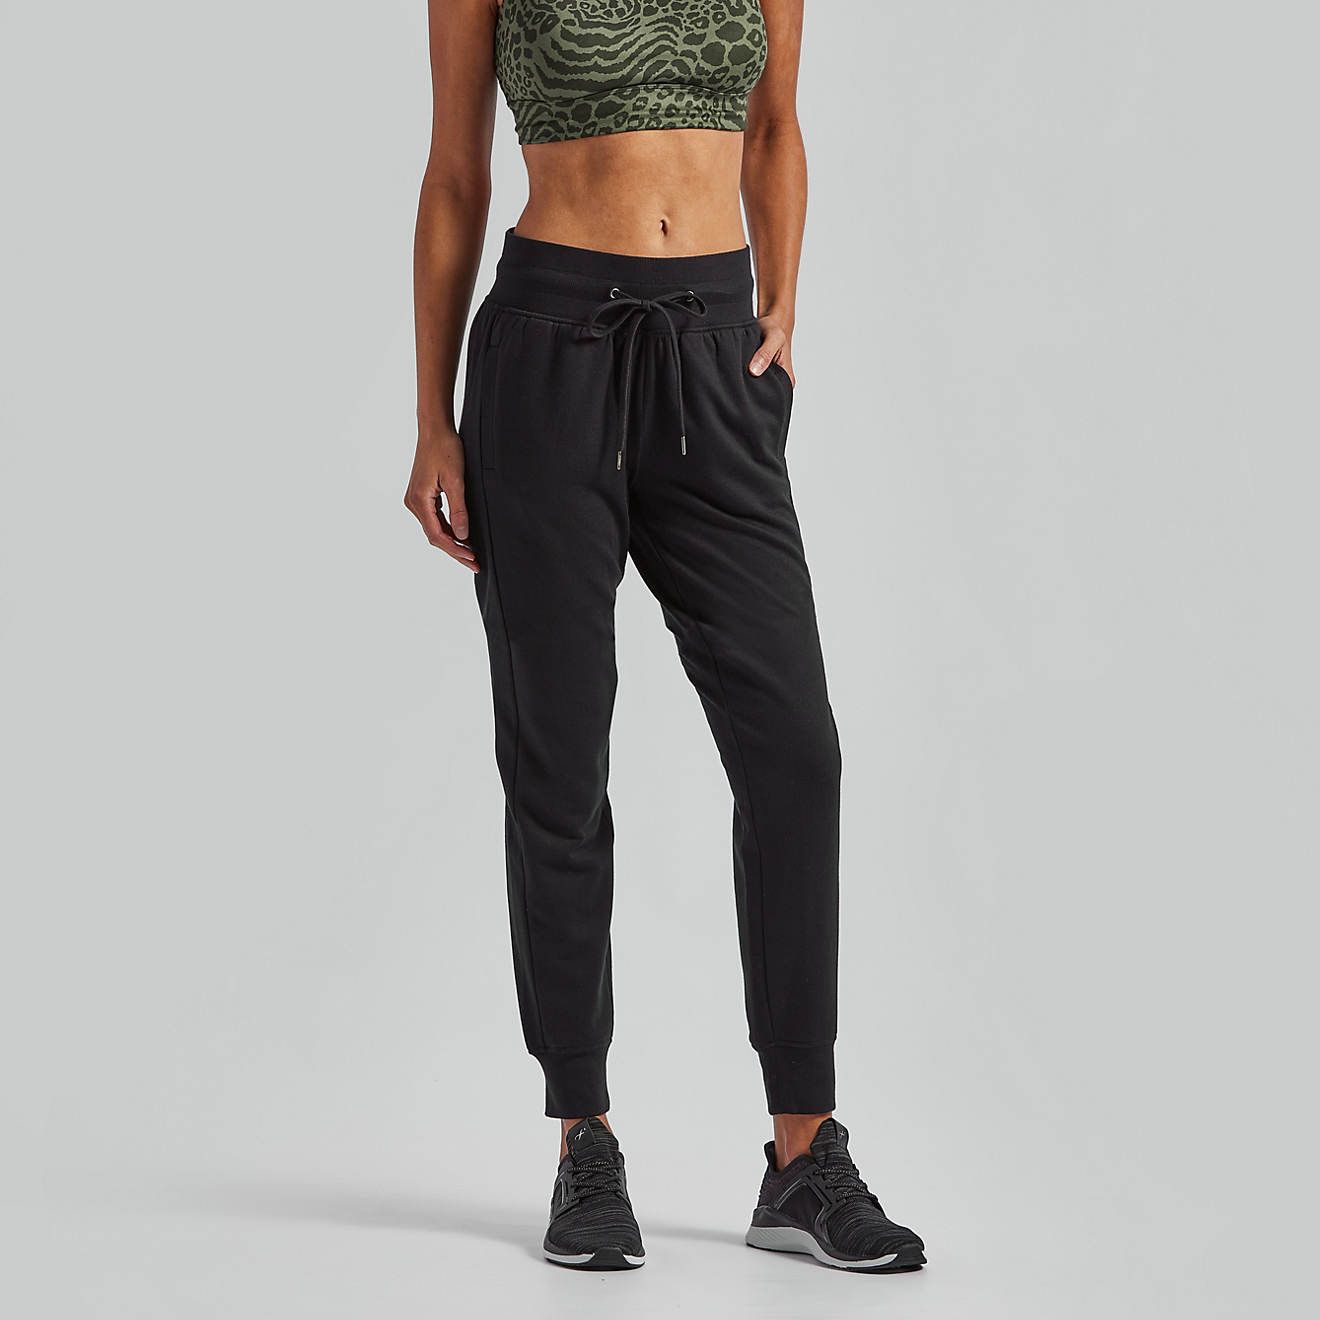 Freely Women's Layla Jogger Pants | Academy | Academy Sports + Outdoors